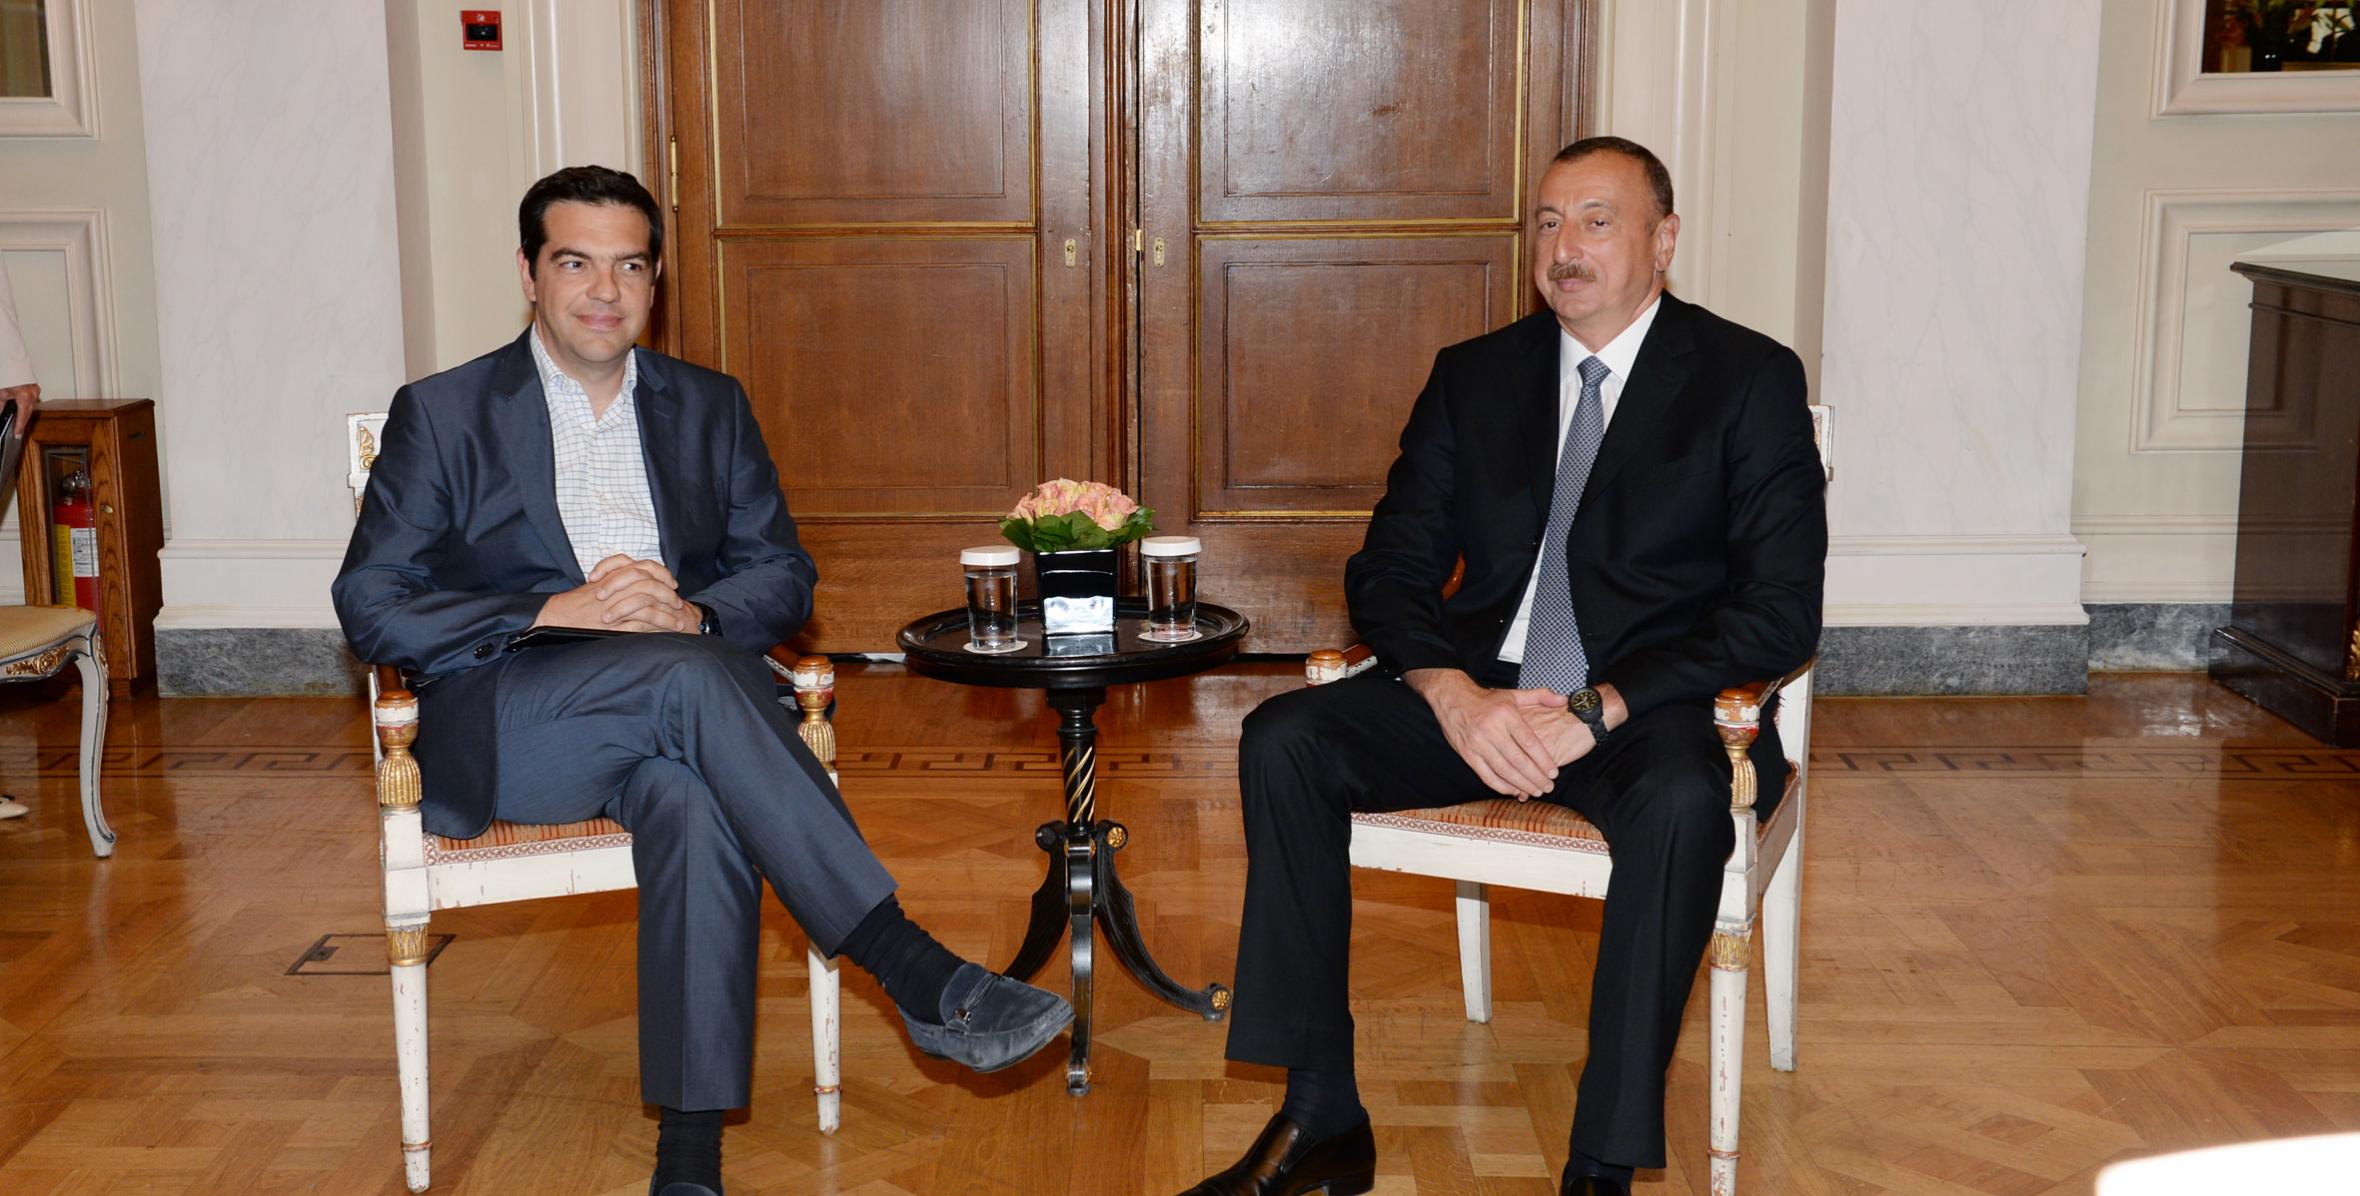 Ilham Aliyev met with Leader of the Coalition of the Radical Left at the Hellenic Parliament Alexis Tsipras